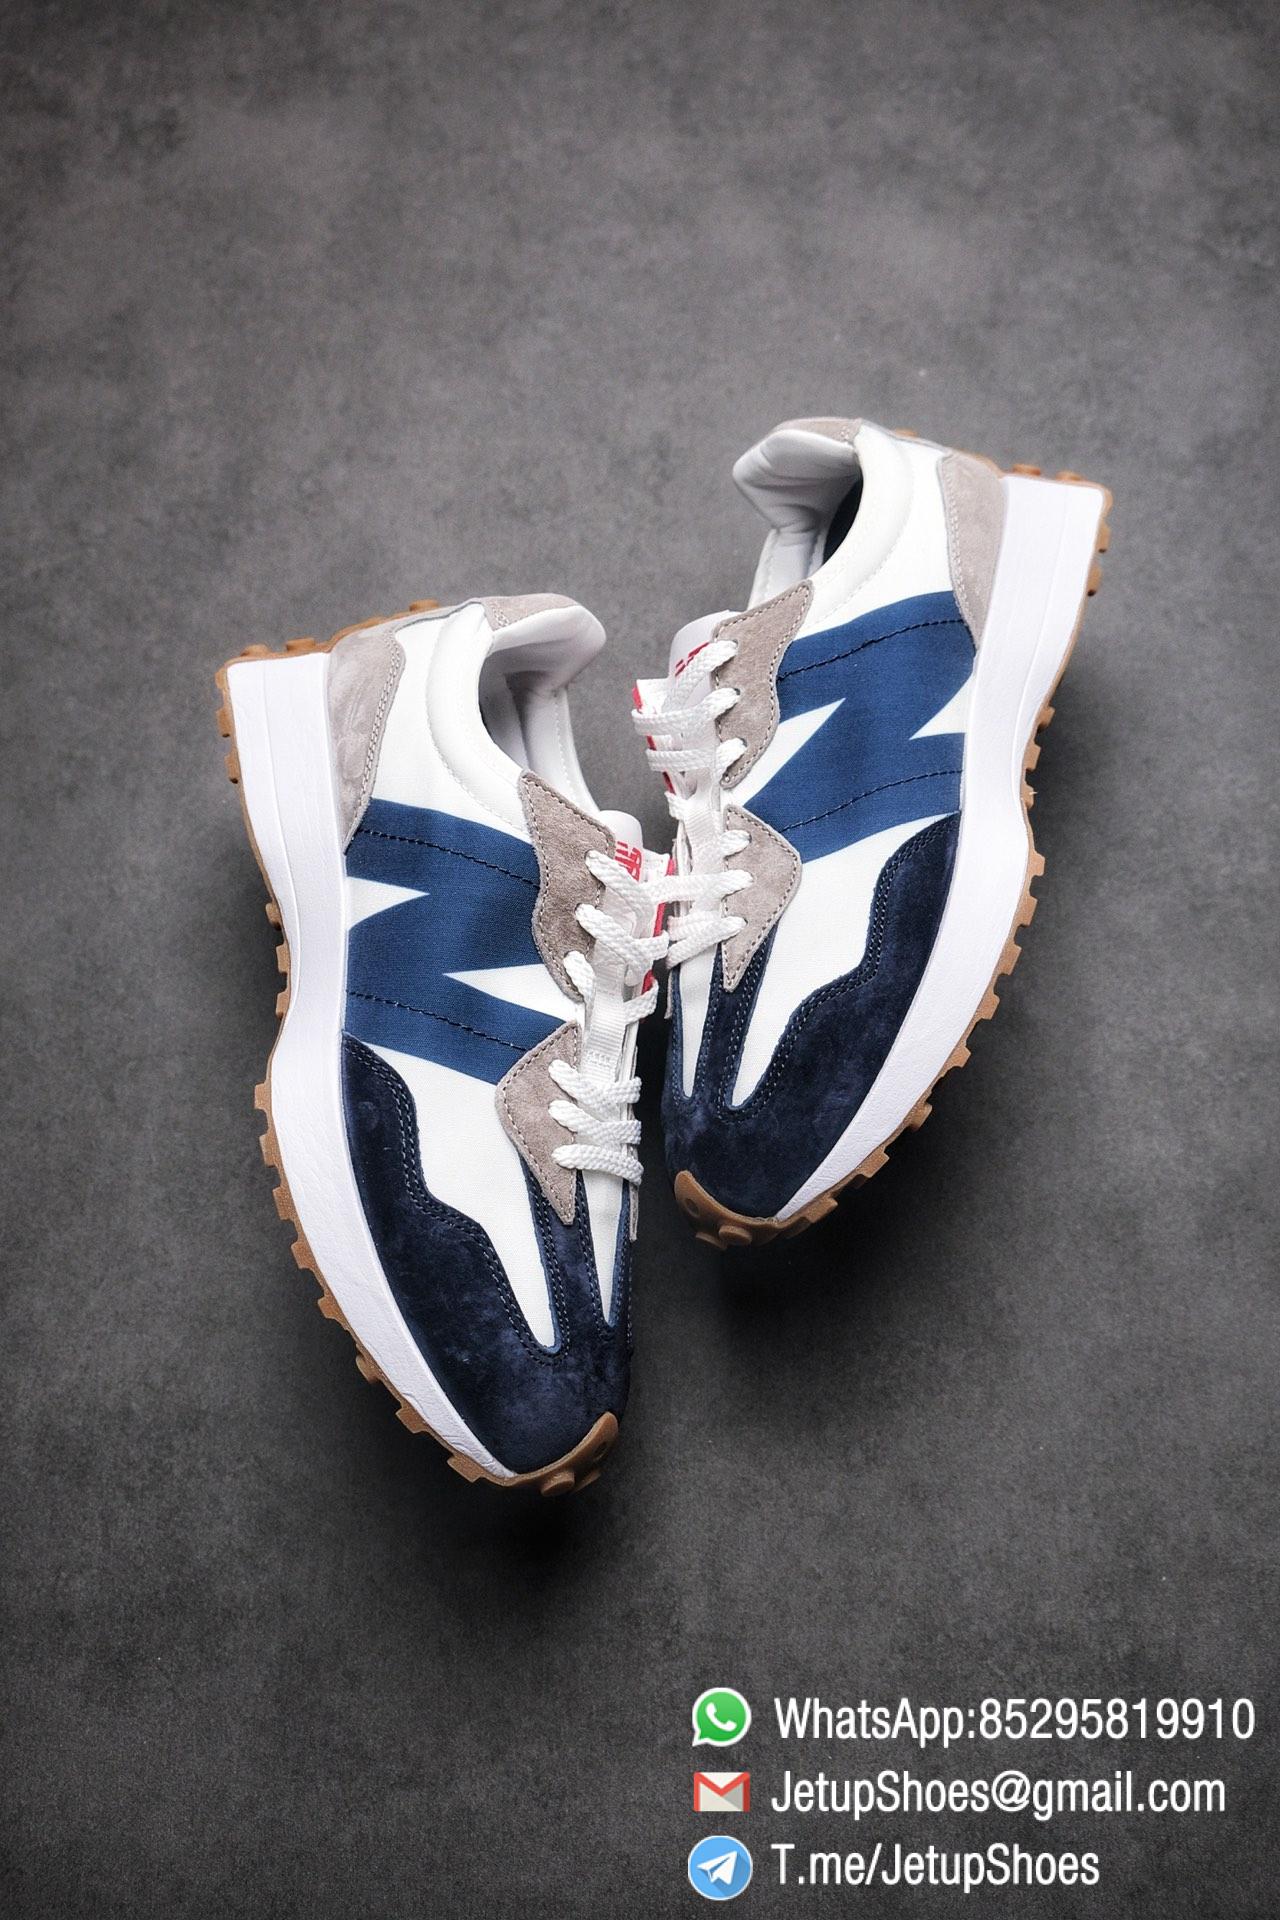 Best Replica New Balance 327 Navy White Gum Running Shoes SKU MS327WR Top Quality Snkrs 03